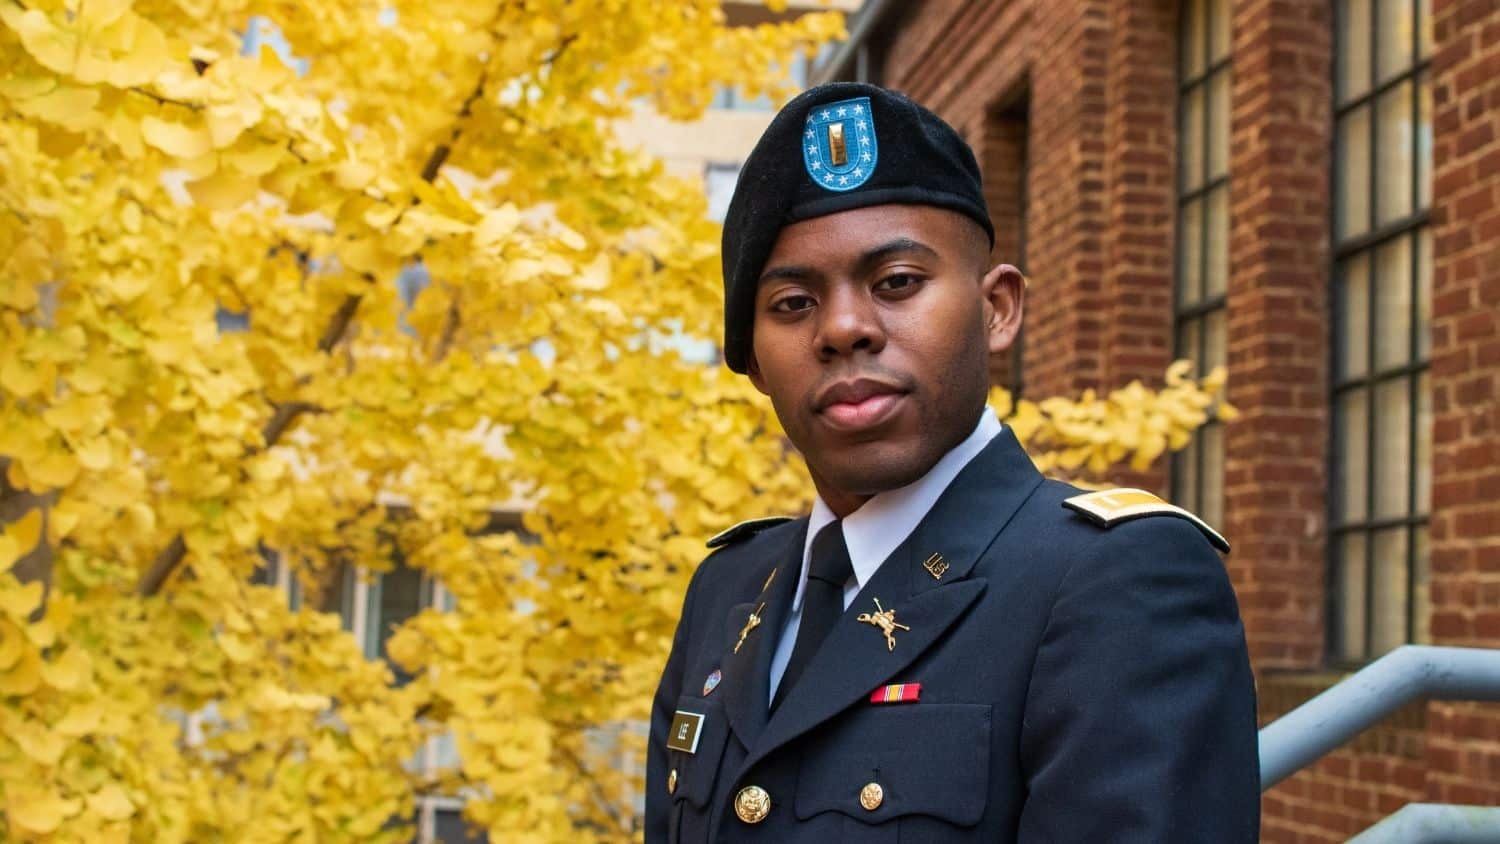 Young alumnus poses in a military uniform in front of a brick building and foliage.